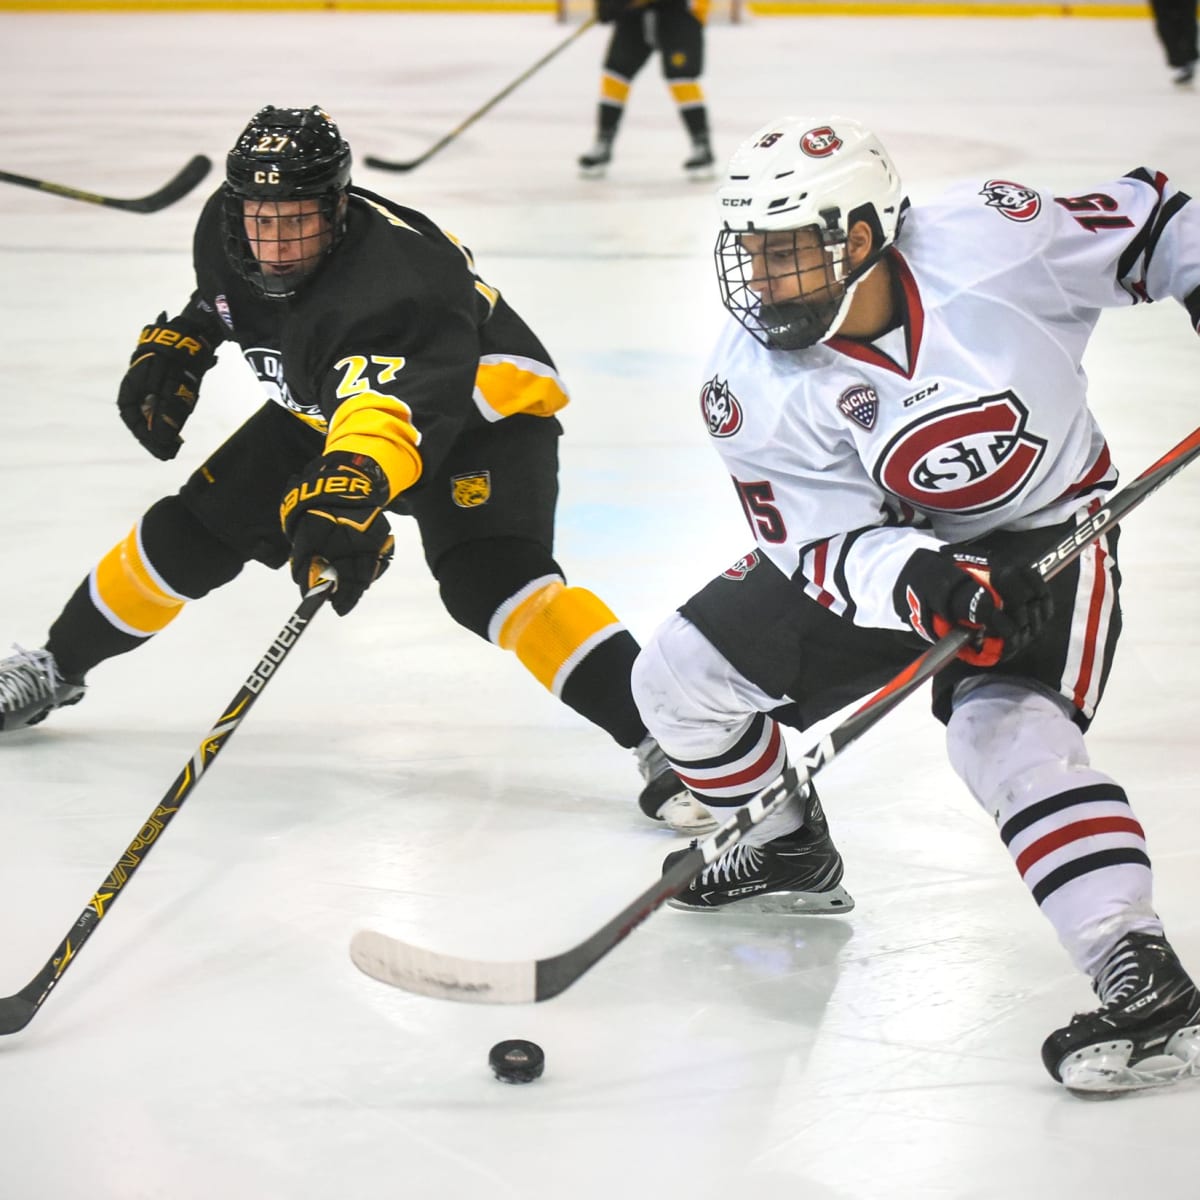 North Dakota at Colorado College Free Live Stream College Hockey - How to Watch and Stream Major League and College Sports